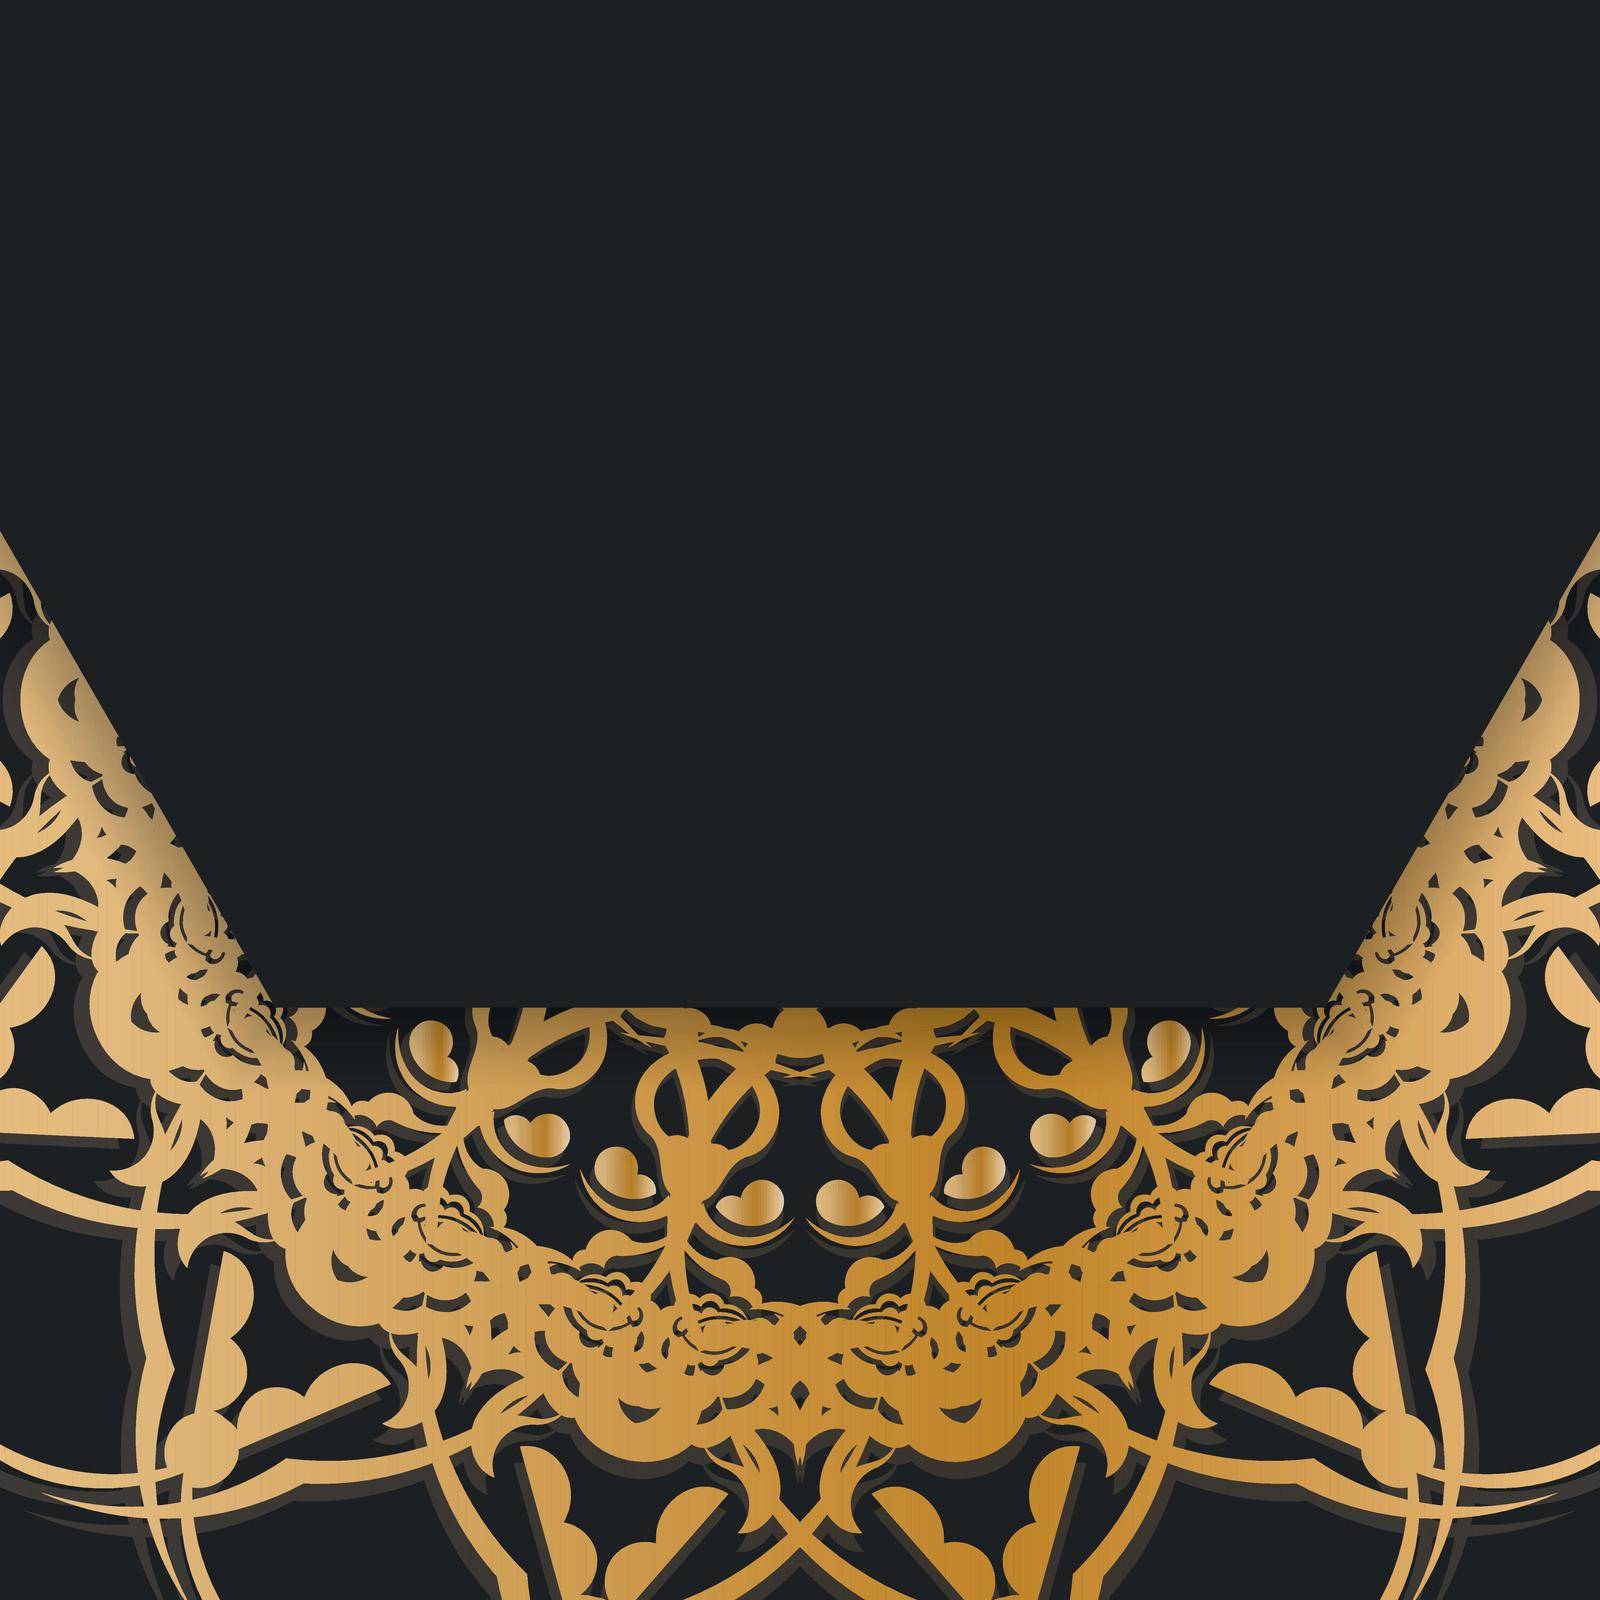 Leaflet in black with vintage gold ornamentation is ready for print. by Javvani